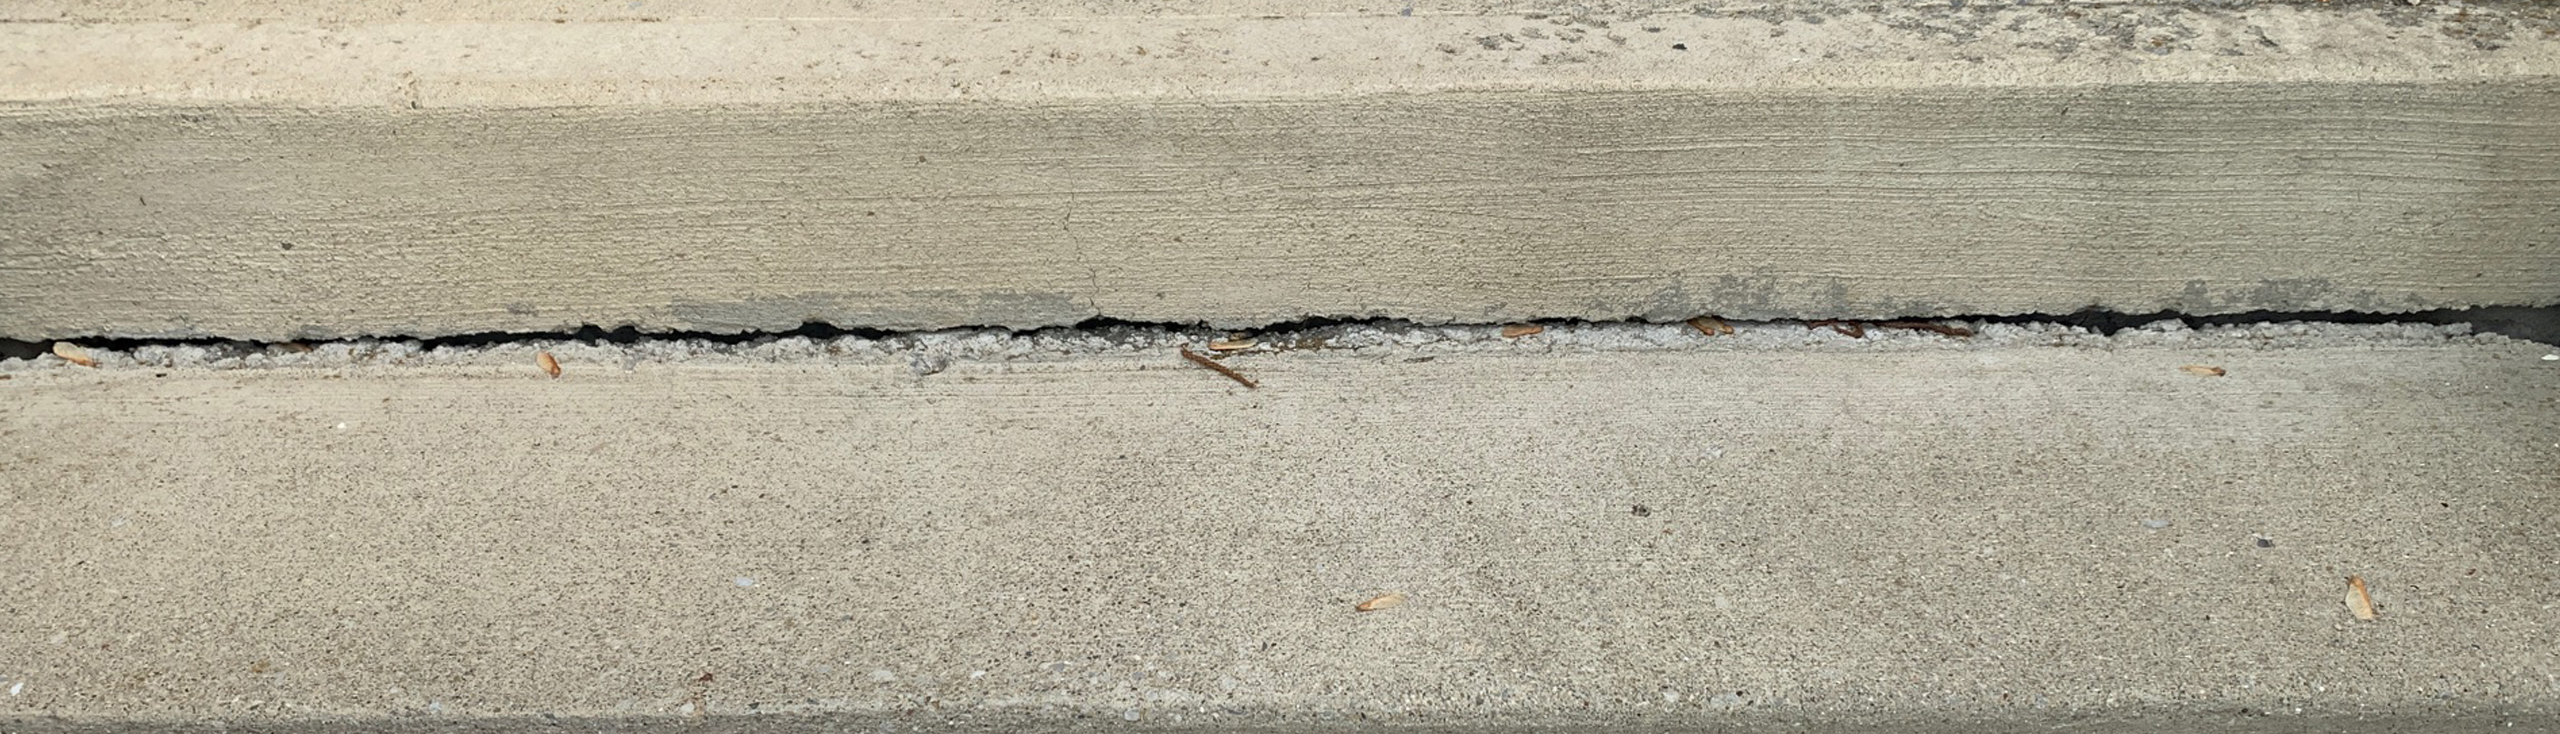 Concrete Crack Repair & Jointed Sealant In Central Ohio